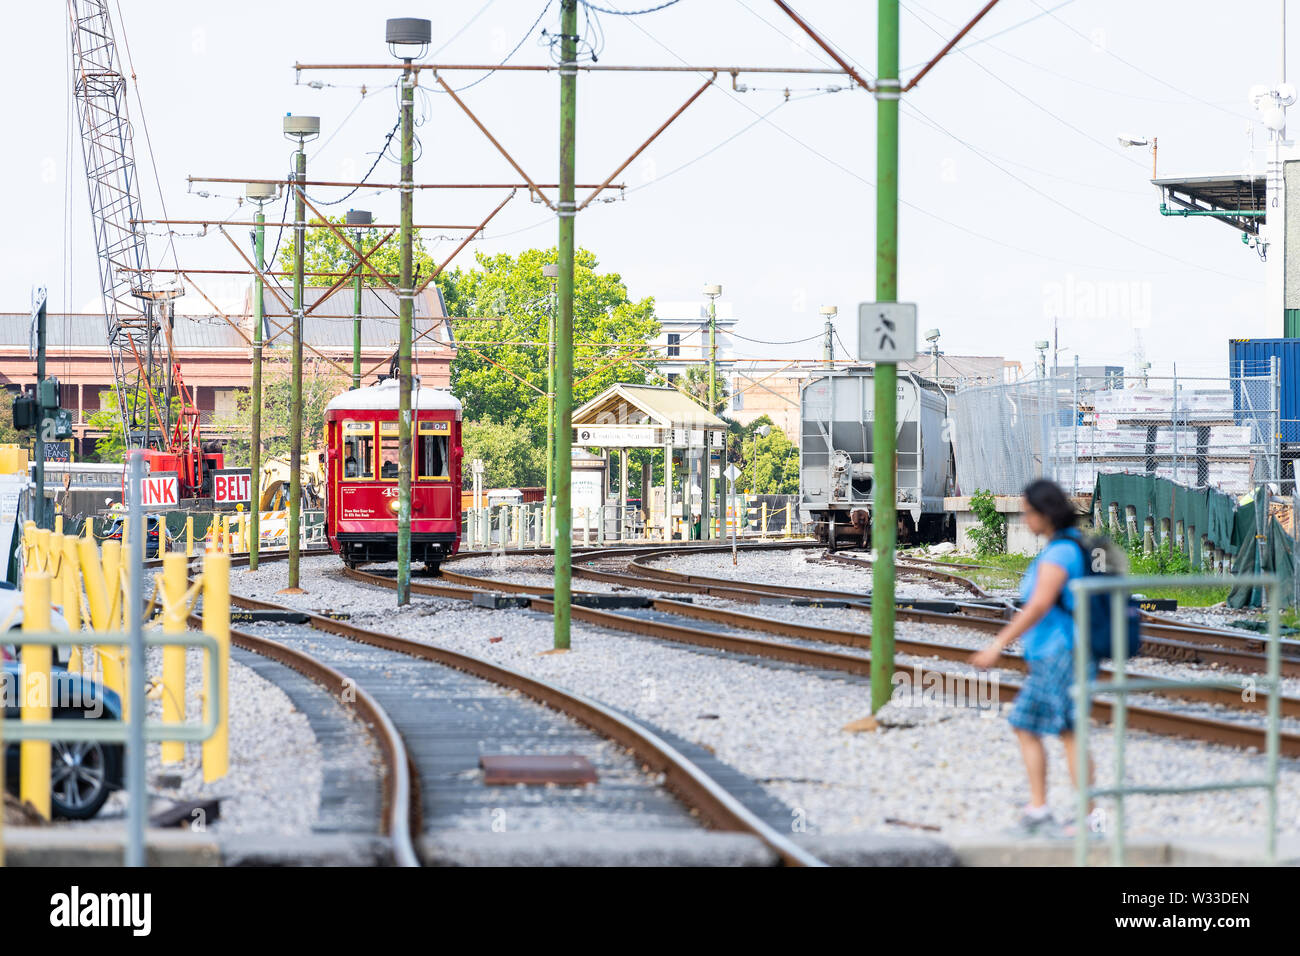 New Orleans, USA - April 23, 2018: Old town street in Louisiana famous city tram streetcar railroad tracks on Dumaine street station stop people walki Stock Photo